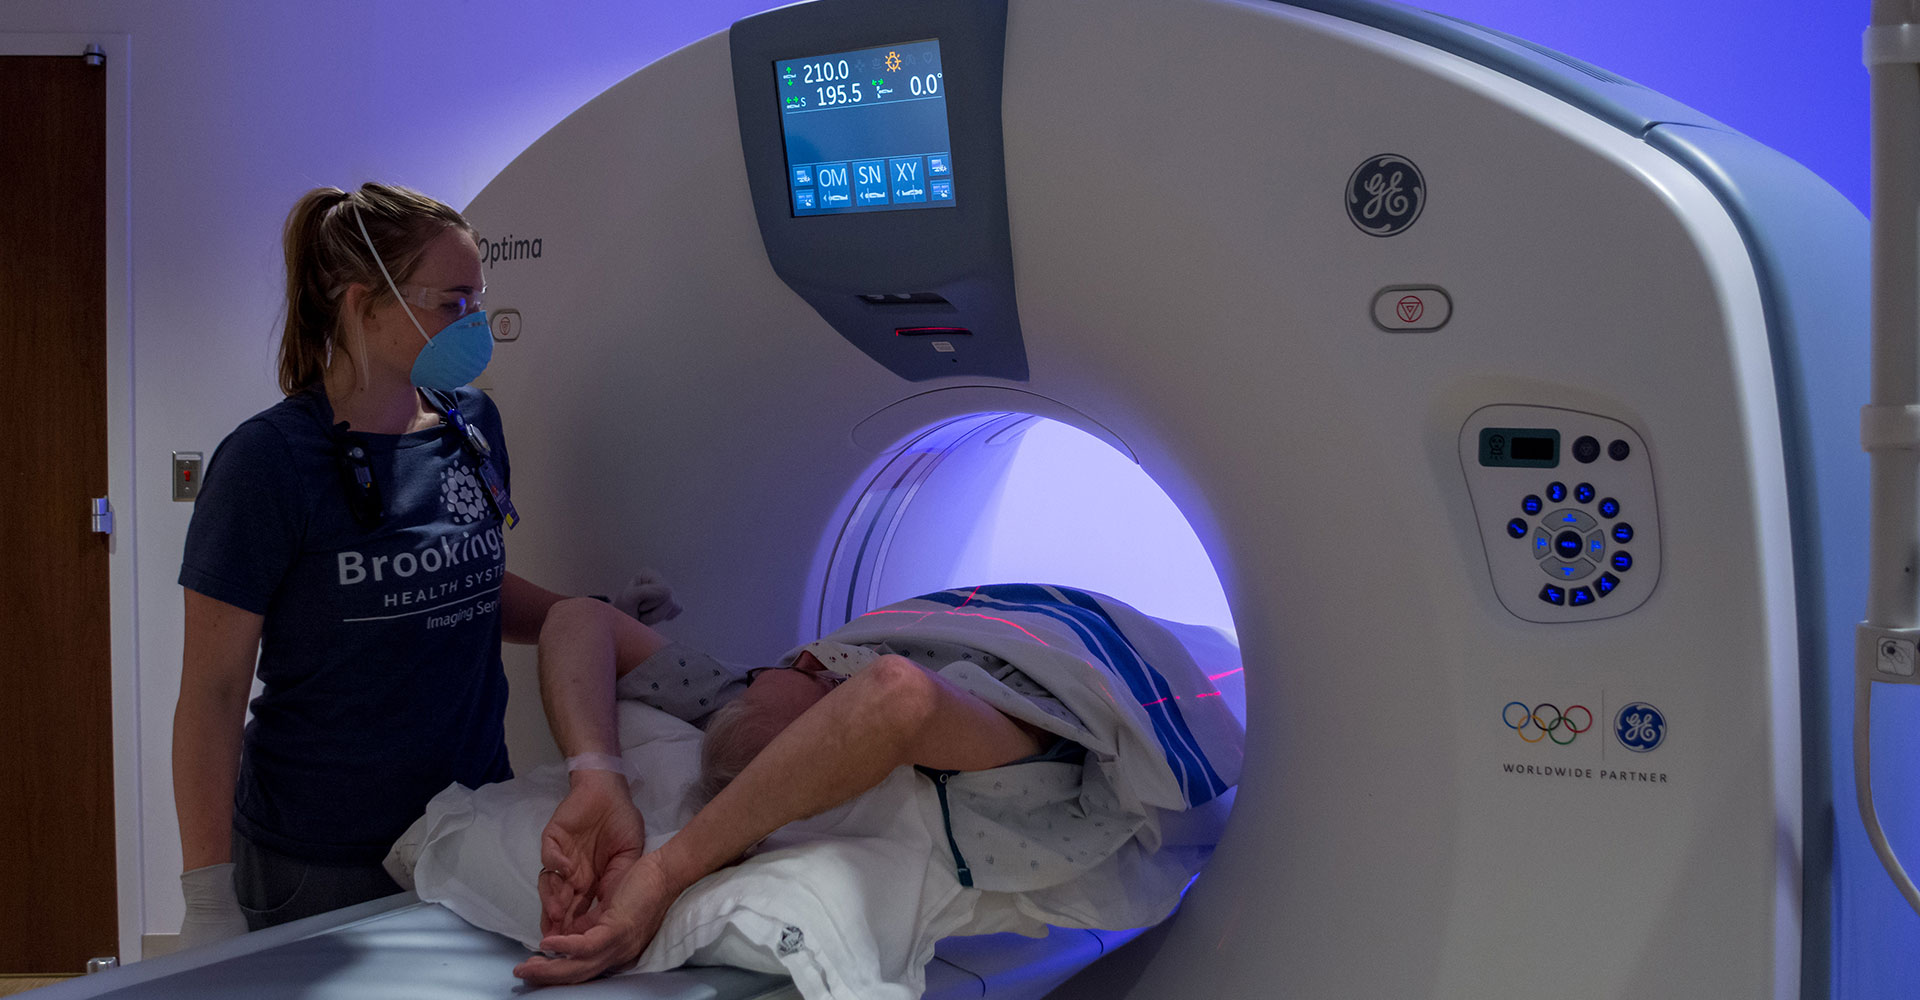 Patient getting a CT scan, assisted by a technologist with appropriate personal protective equipment